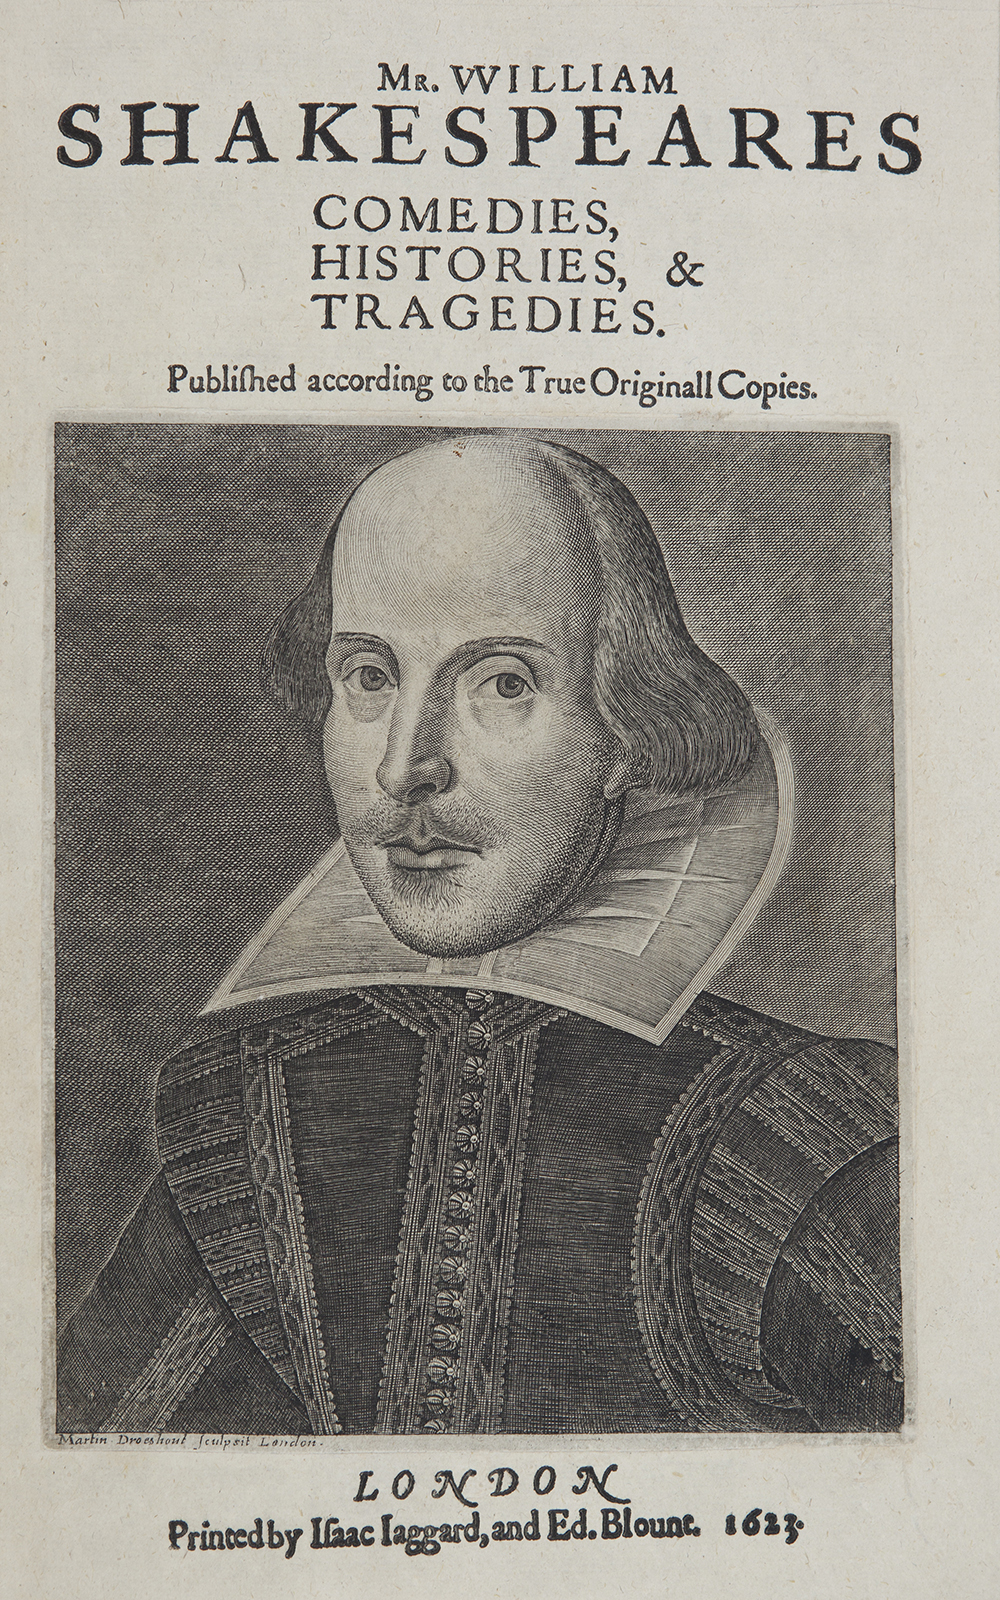 A portrait of William Shakespeare engraved by Martin Droeshout as the frontispiece for the title page of the First Folio